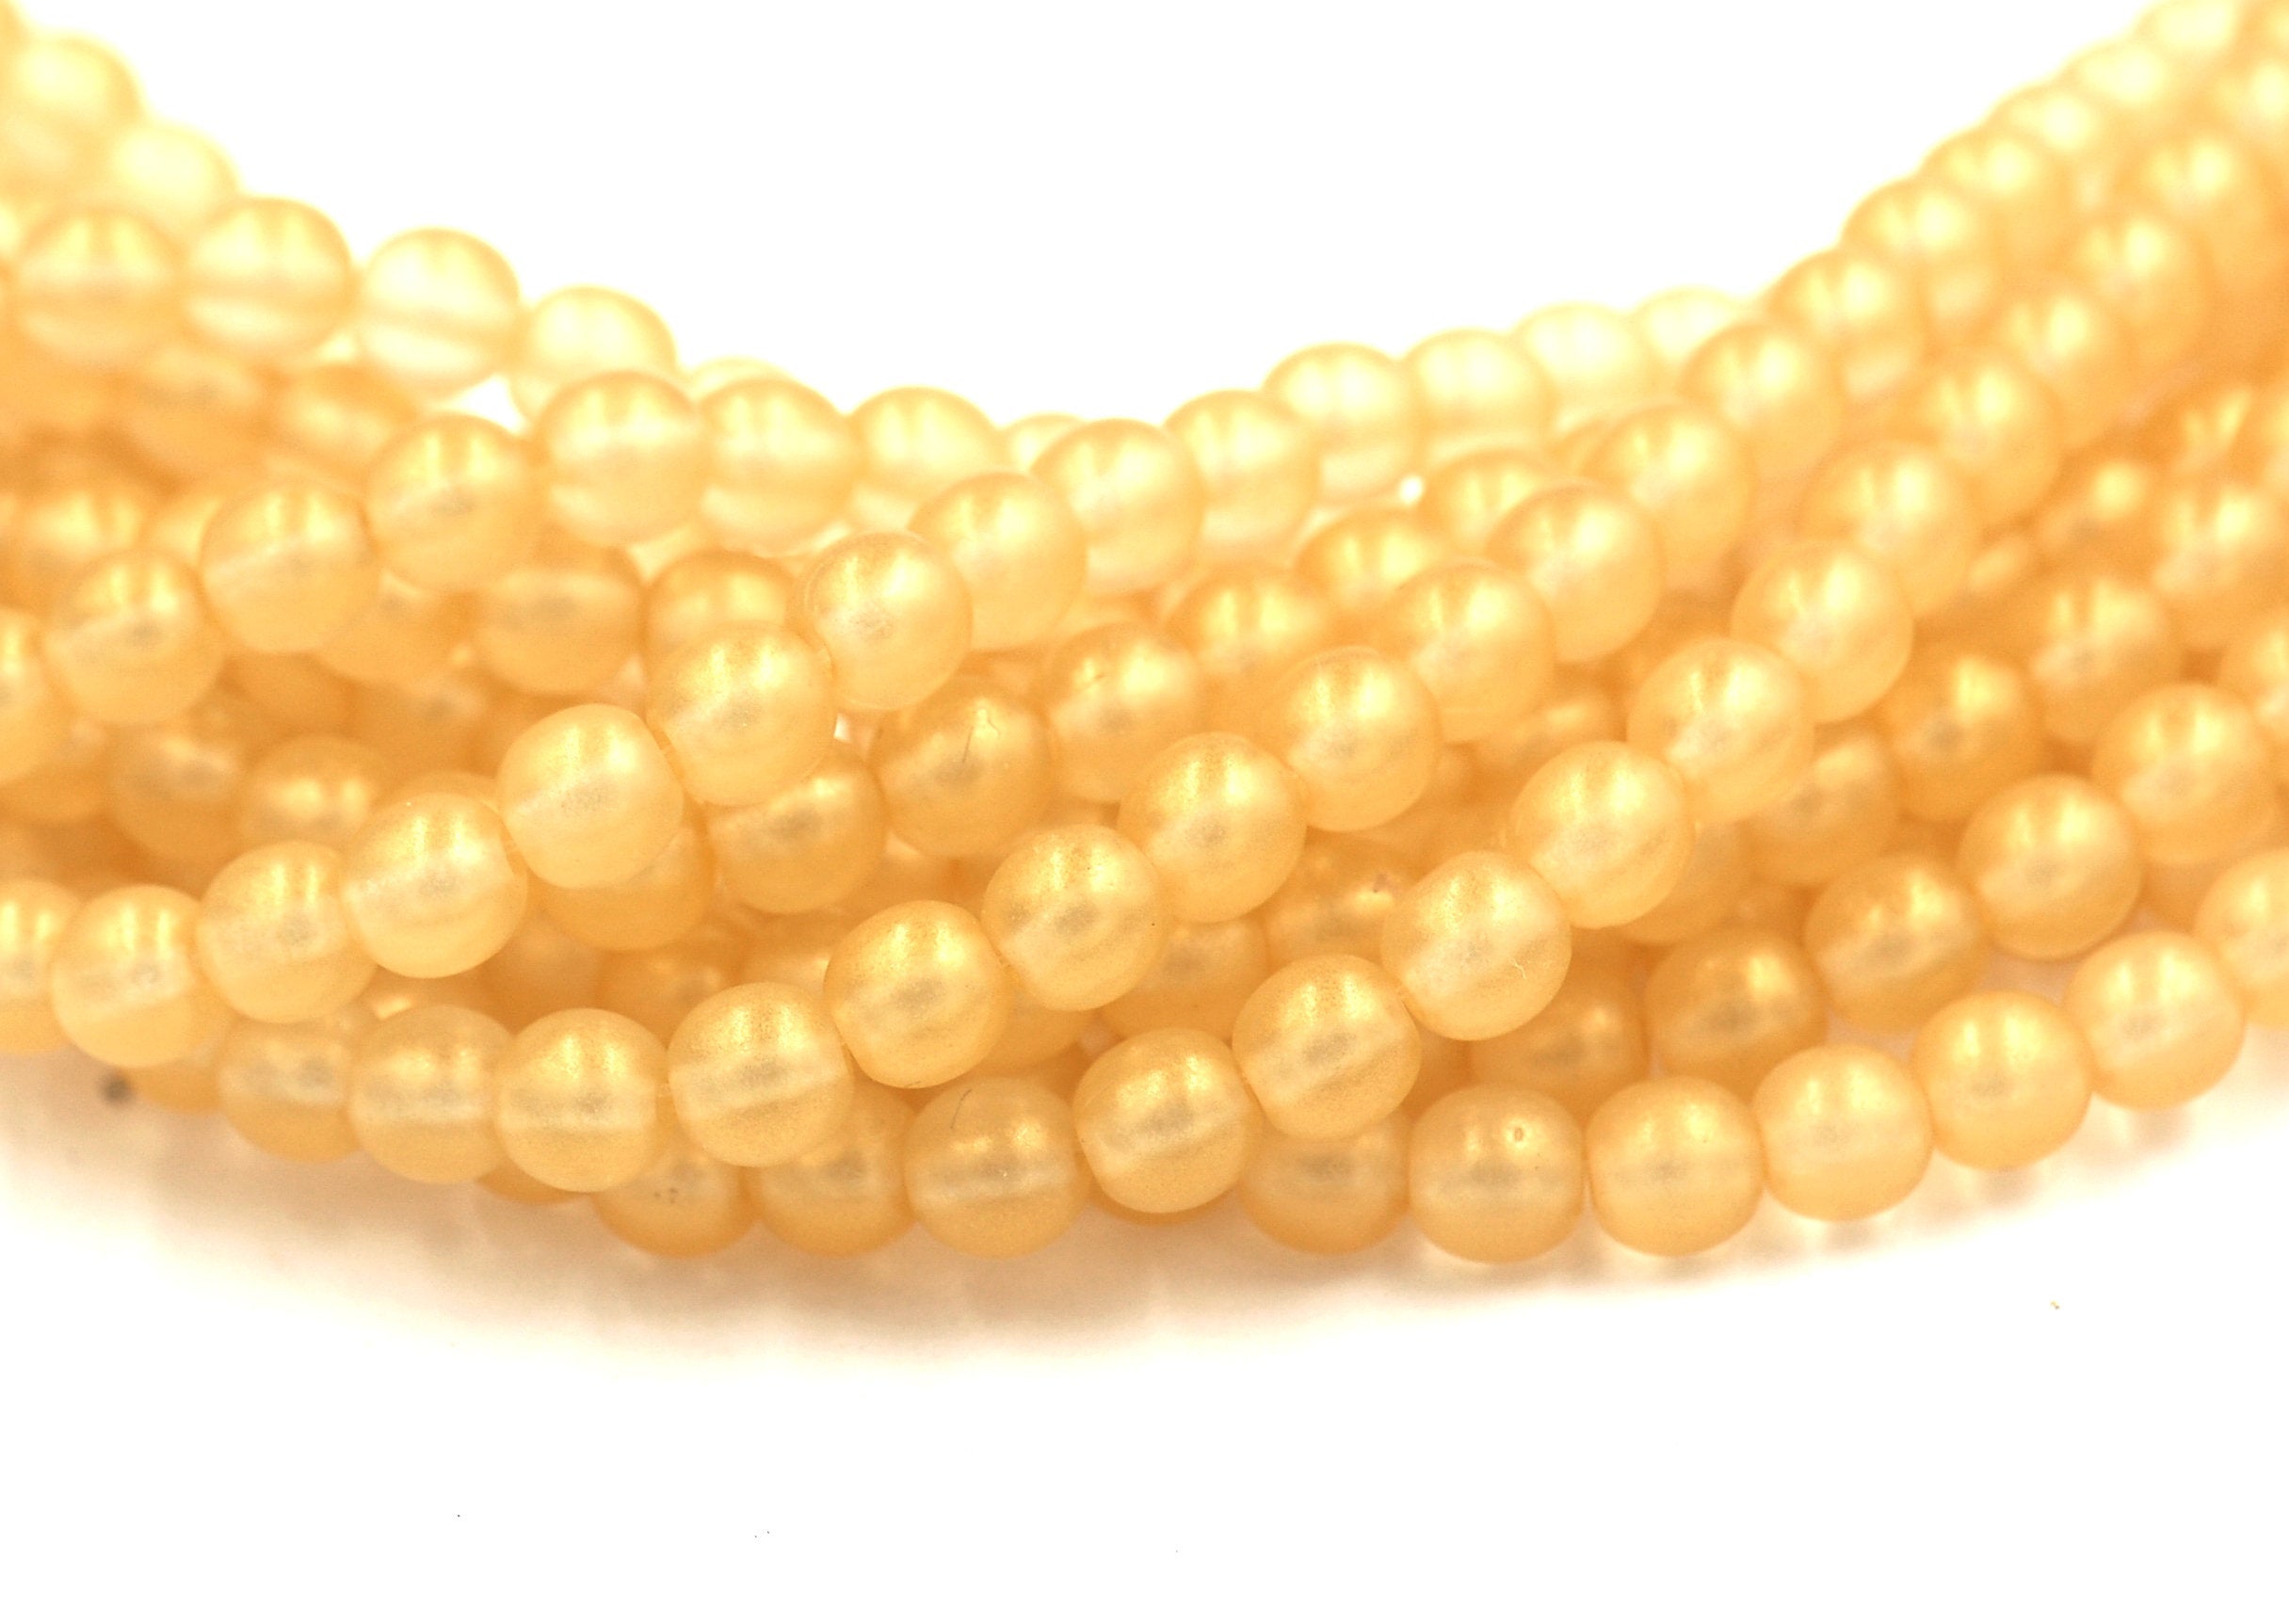 Sueded Gold Lamé Czech Glass Bead 6mm Round  - 50 Pc